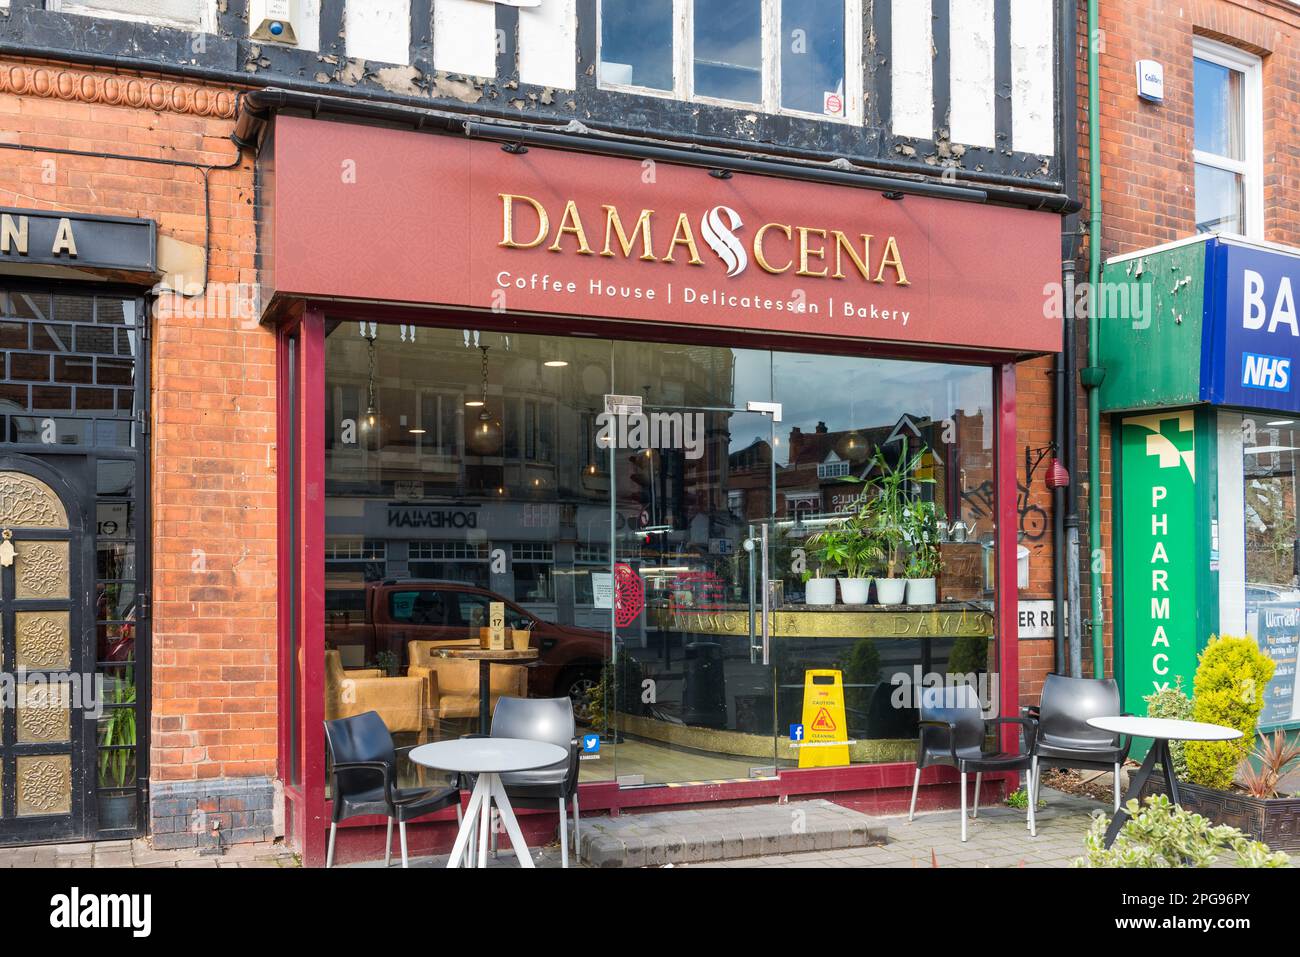 Damascena middle eastern cafe and delicatessen in Moseley, Birmingham Stock Photo